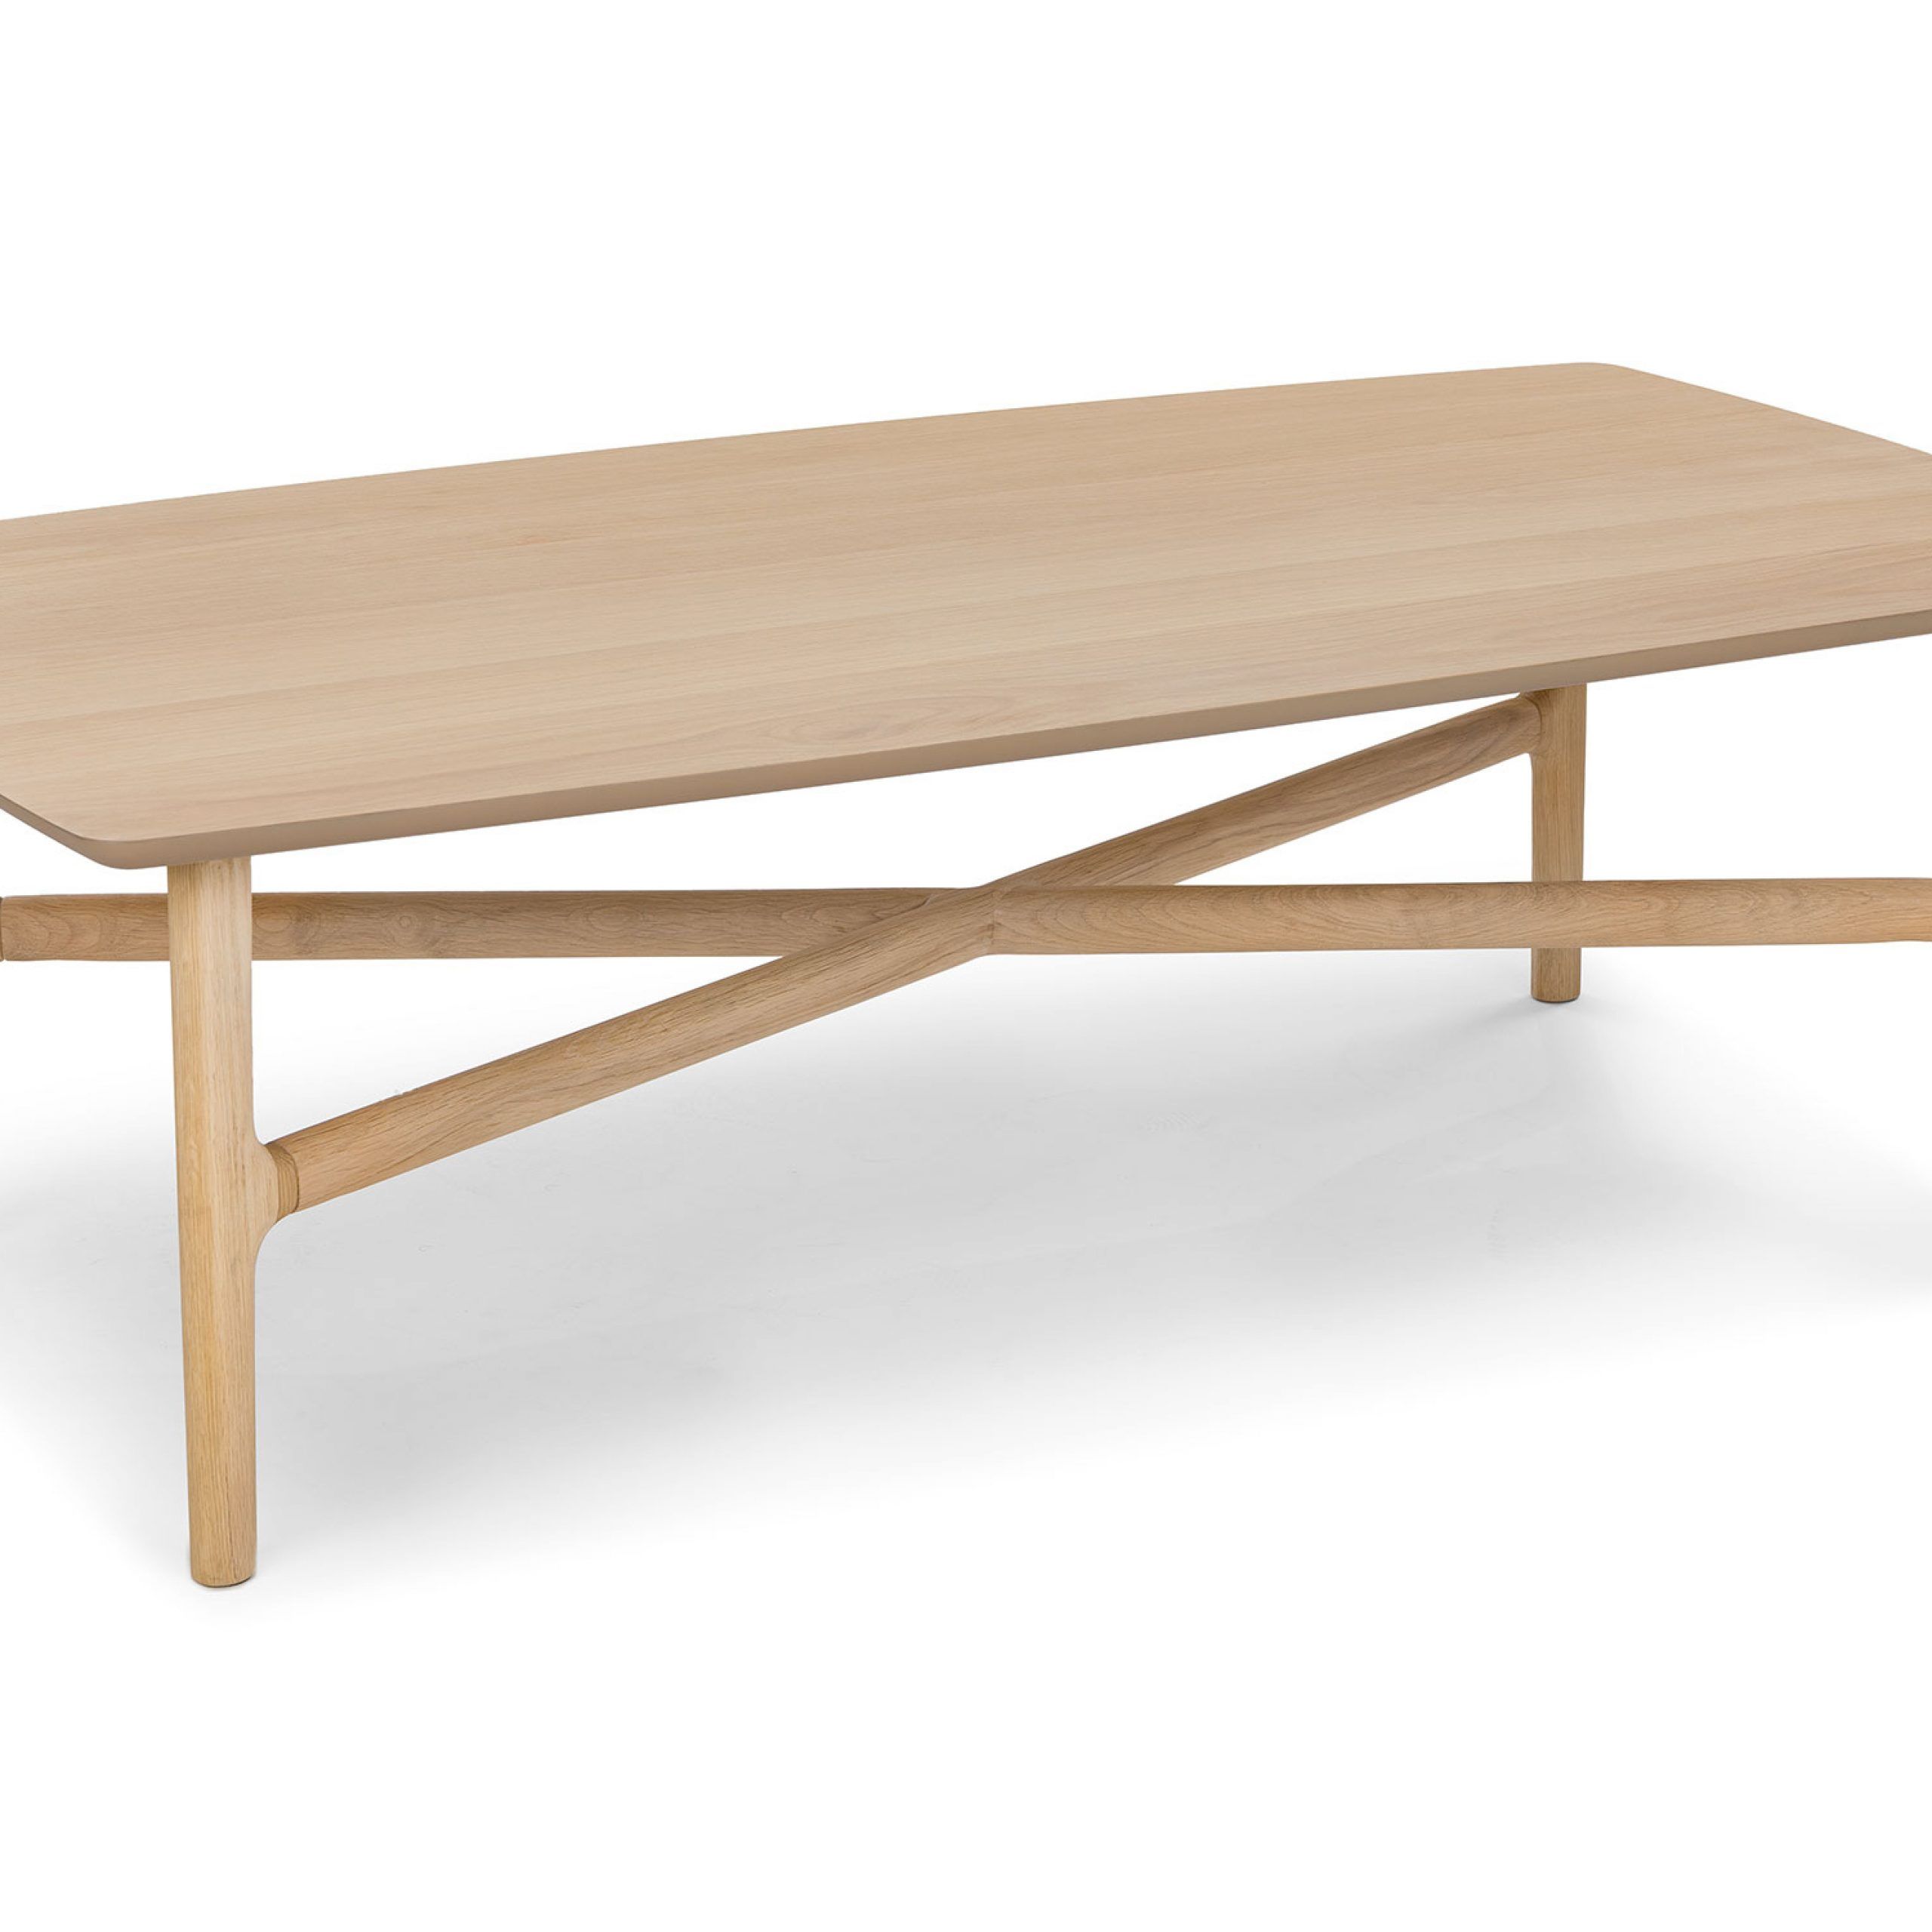 Brezza Light Oak Rectangular Coffee Table | Article Inside Rectangle Coffee Tables (View 19 of 20)